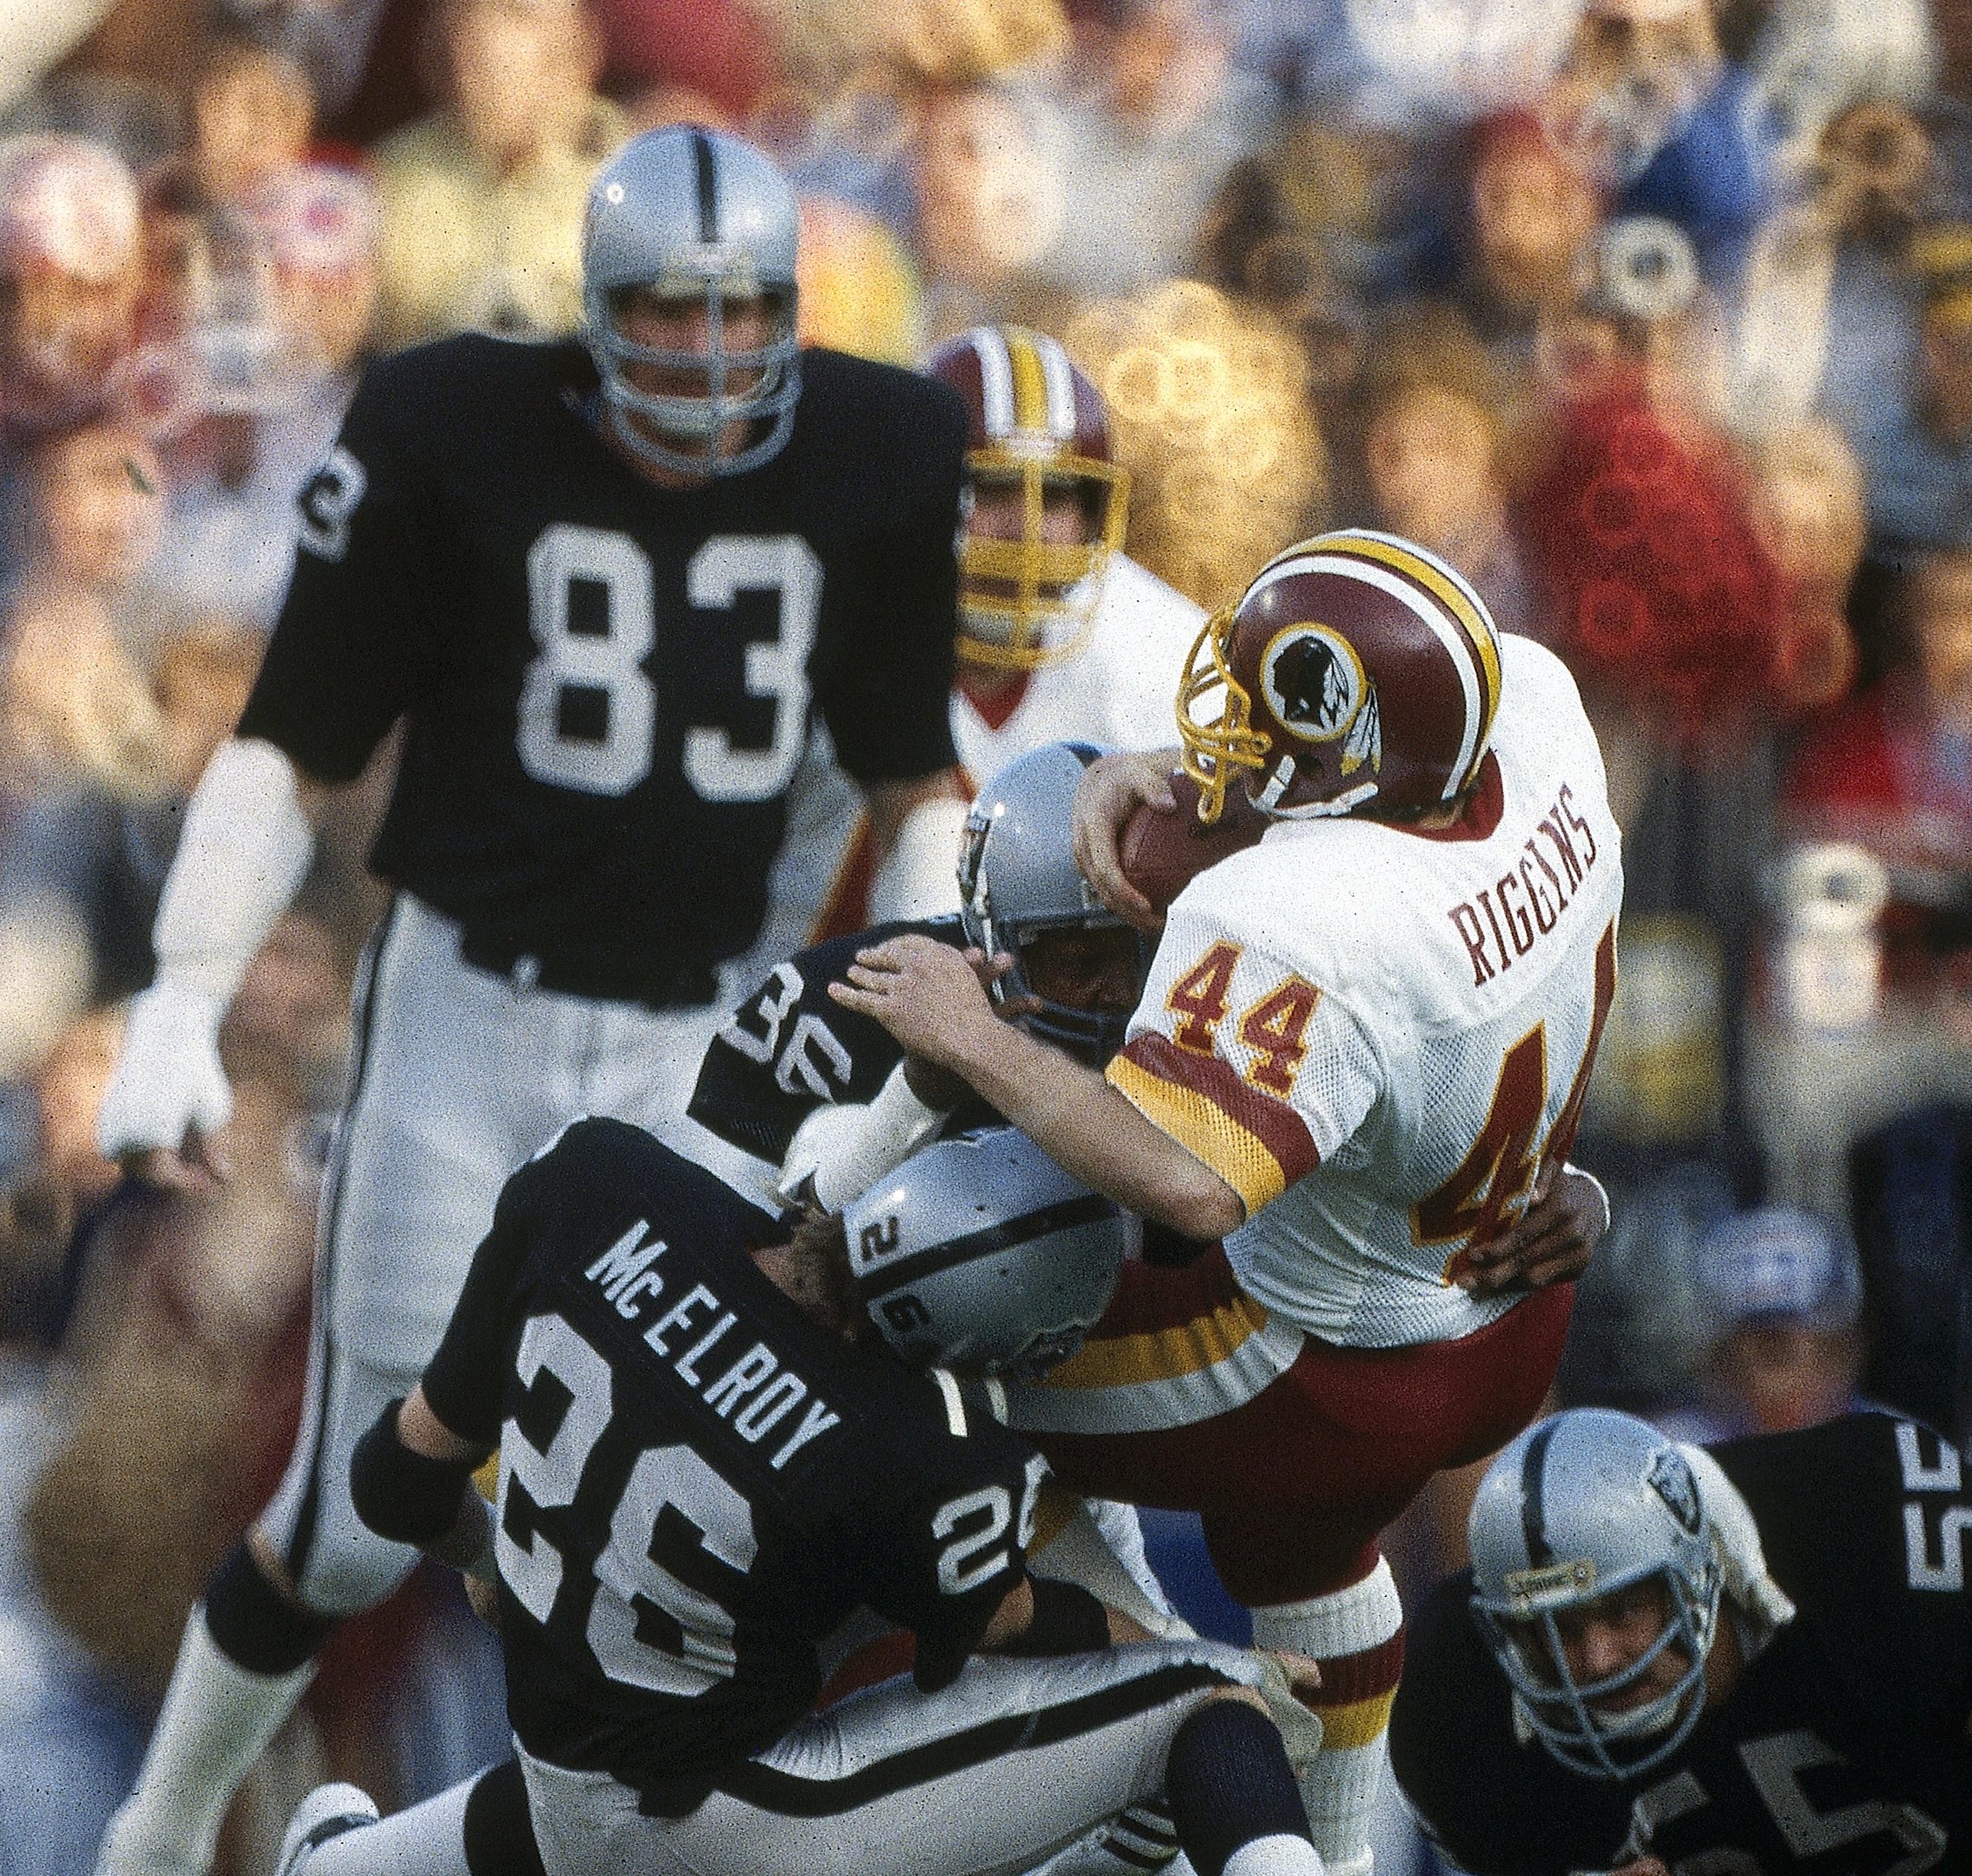 Football: Super Bowl XVIII: Washington Redskins John Riggins (44) in action vs Los Angeles Raiders Vann McElroy (26) at Tampa Stadium. Tampa, FL 1/22/1984 CREDIT: Andy Hayt (Photo by Andy Hayt /Sports Illustrated/Getty Images) (Set Number: X29570 TK1 )